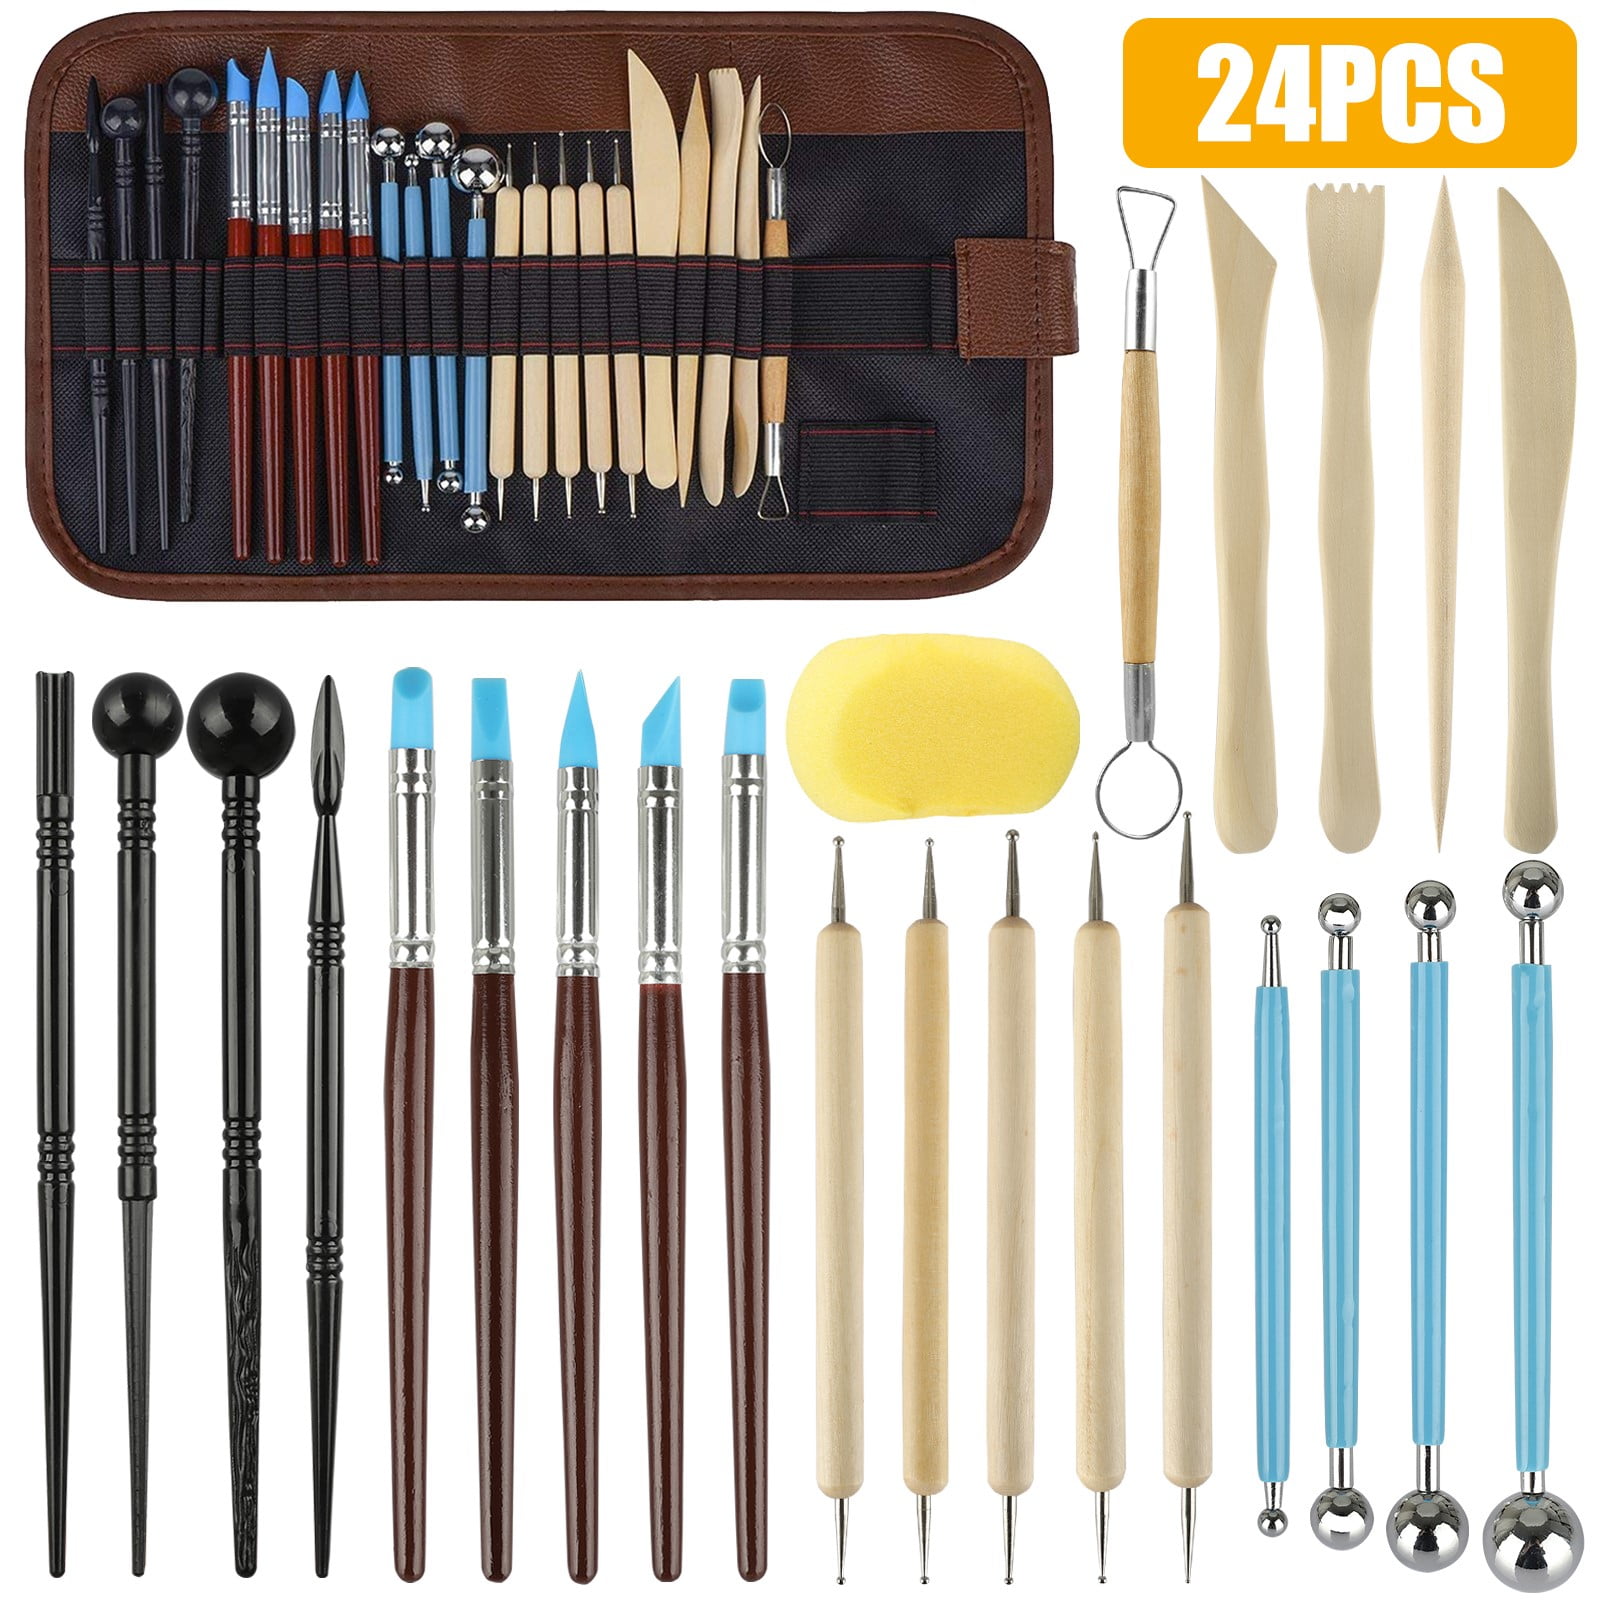 US 18Pcs Clay Sculpting Carving Pottery Tool Set Wax Polymer Shaper Modeling DIY 